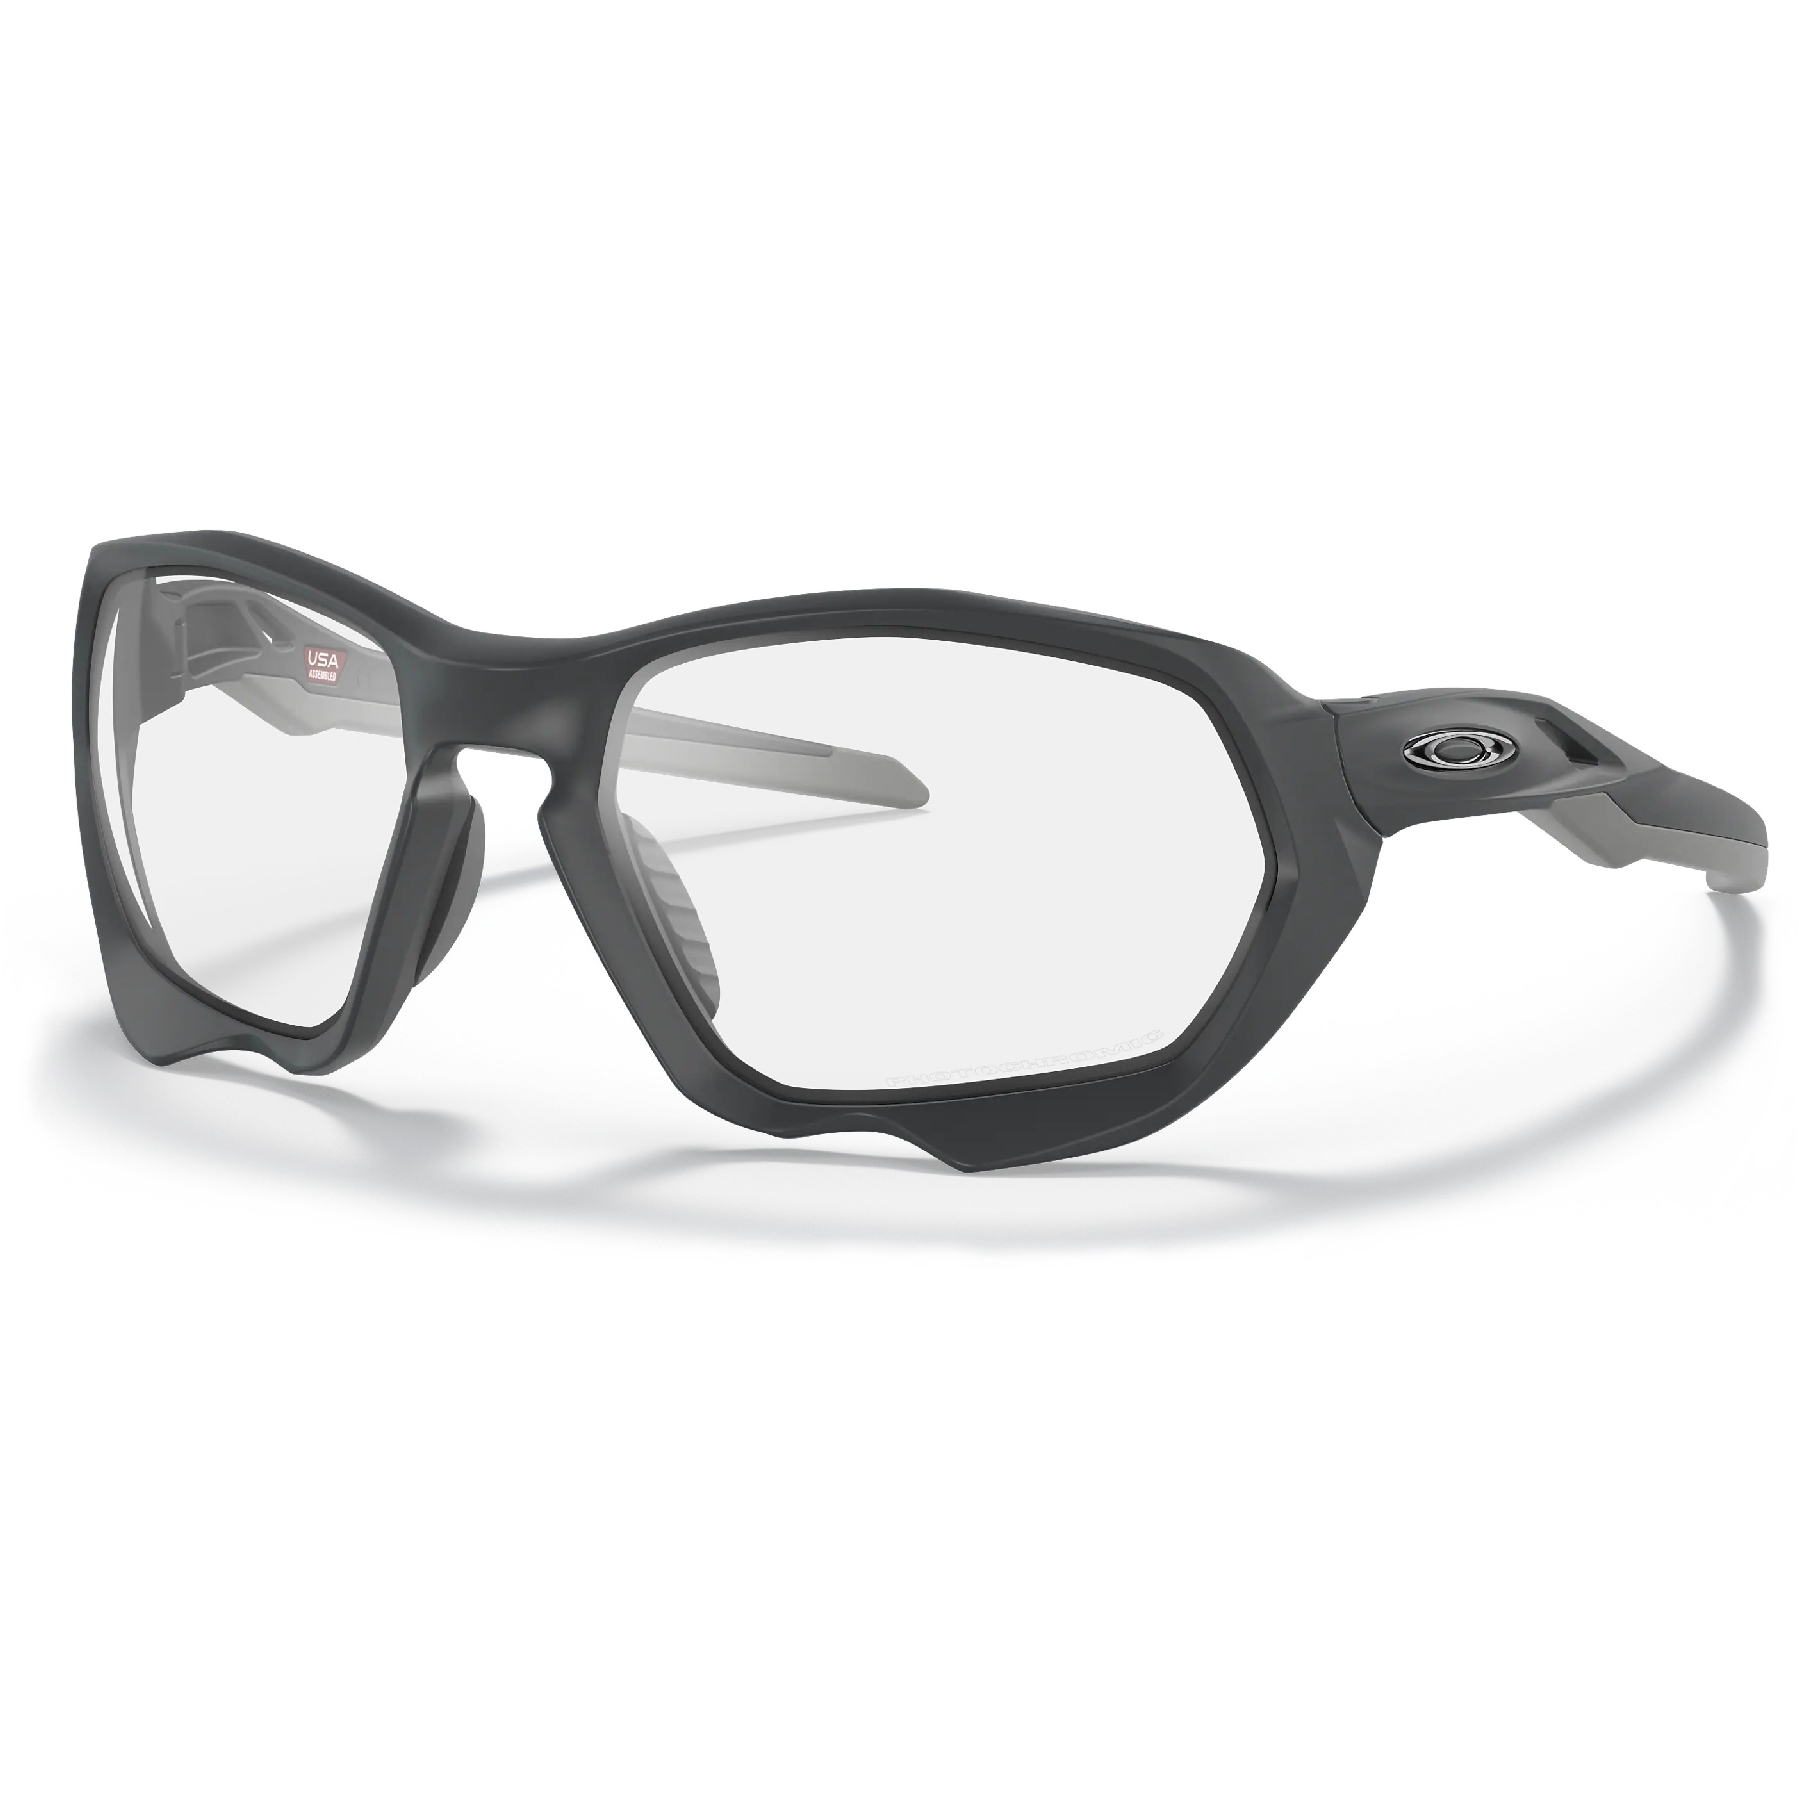 Picture of Oakley Plazma Glasses - Matte Carbon/Clear to Black Iridium Photochromic - OO9019-0559